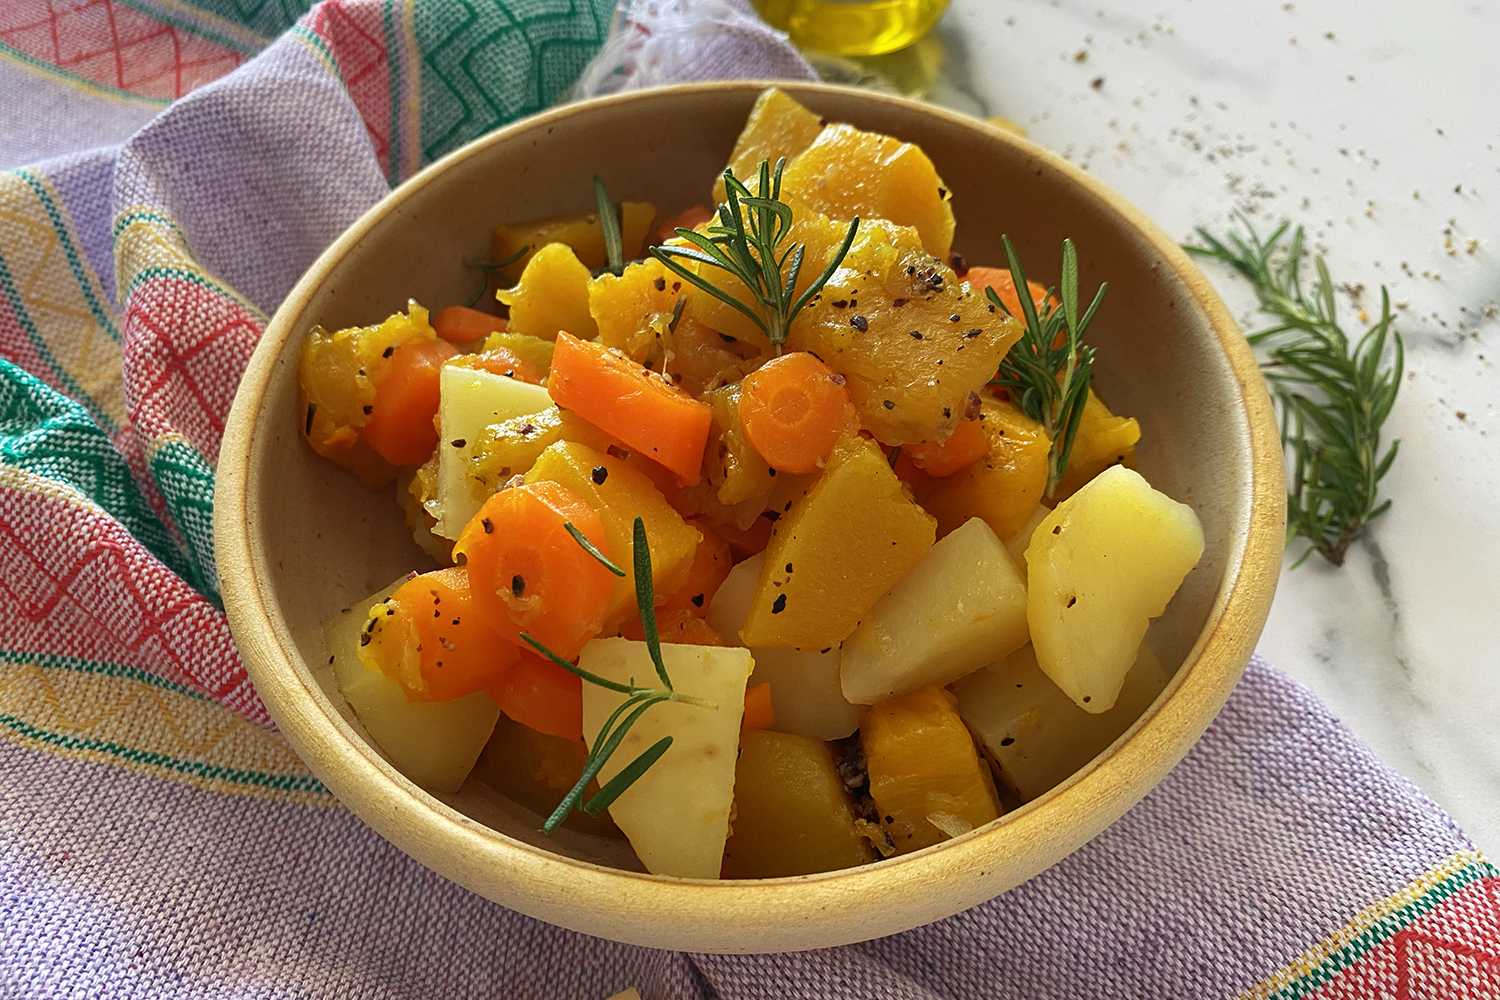 Yellow bowl filled with carrot, potato and pumpkin cubes topped with rosemary sprig